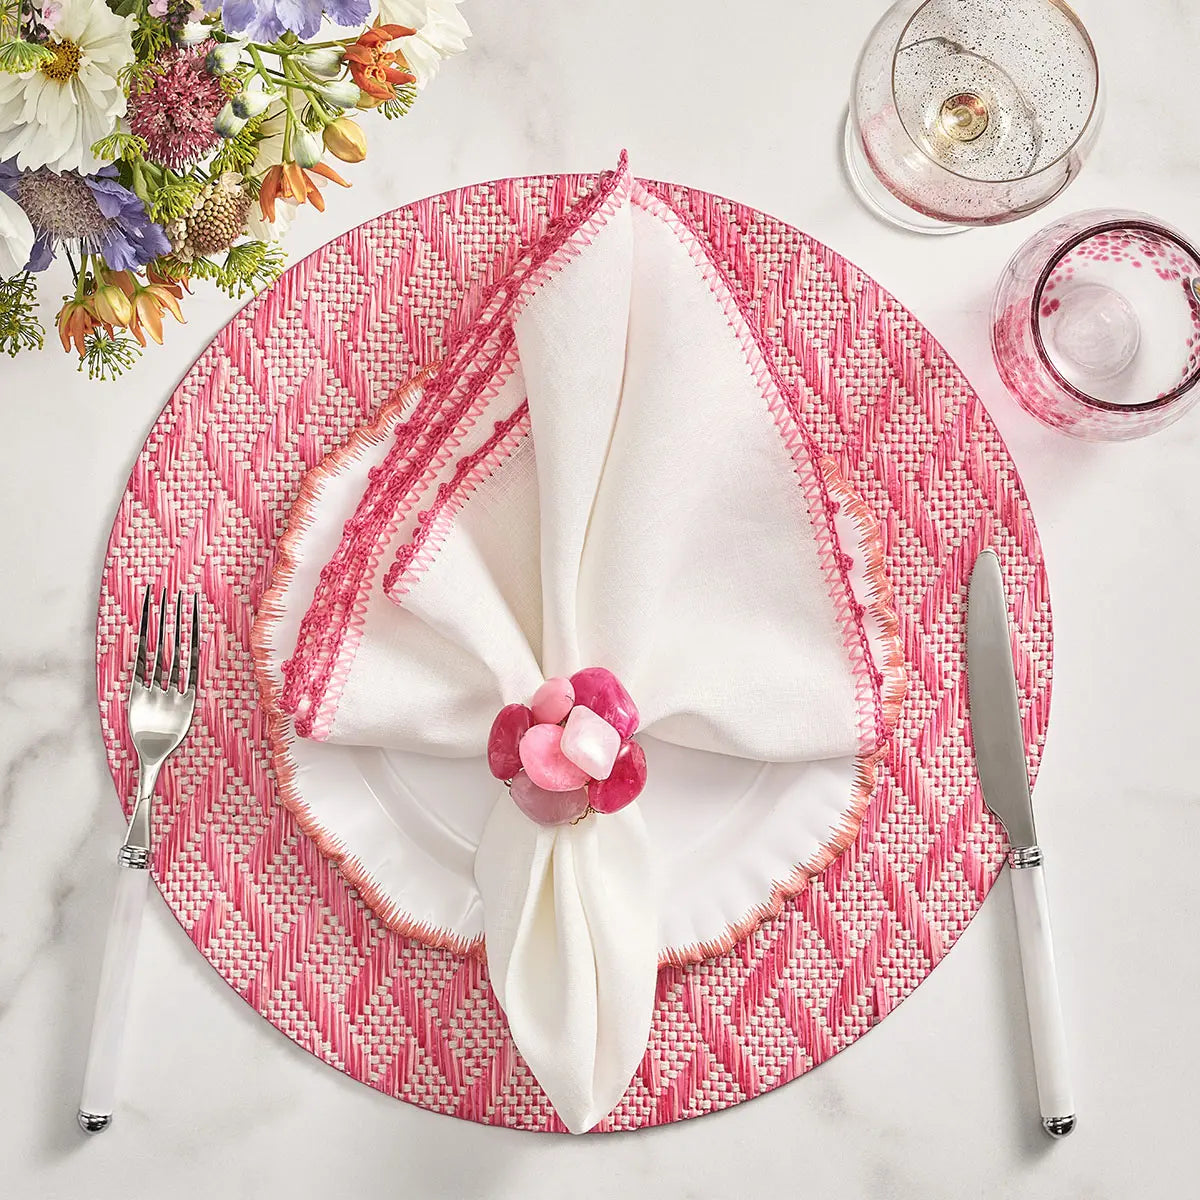 Kim Seybert Basketweave Placemat in Blush Pink set on a table with dinnerware 